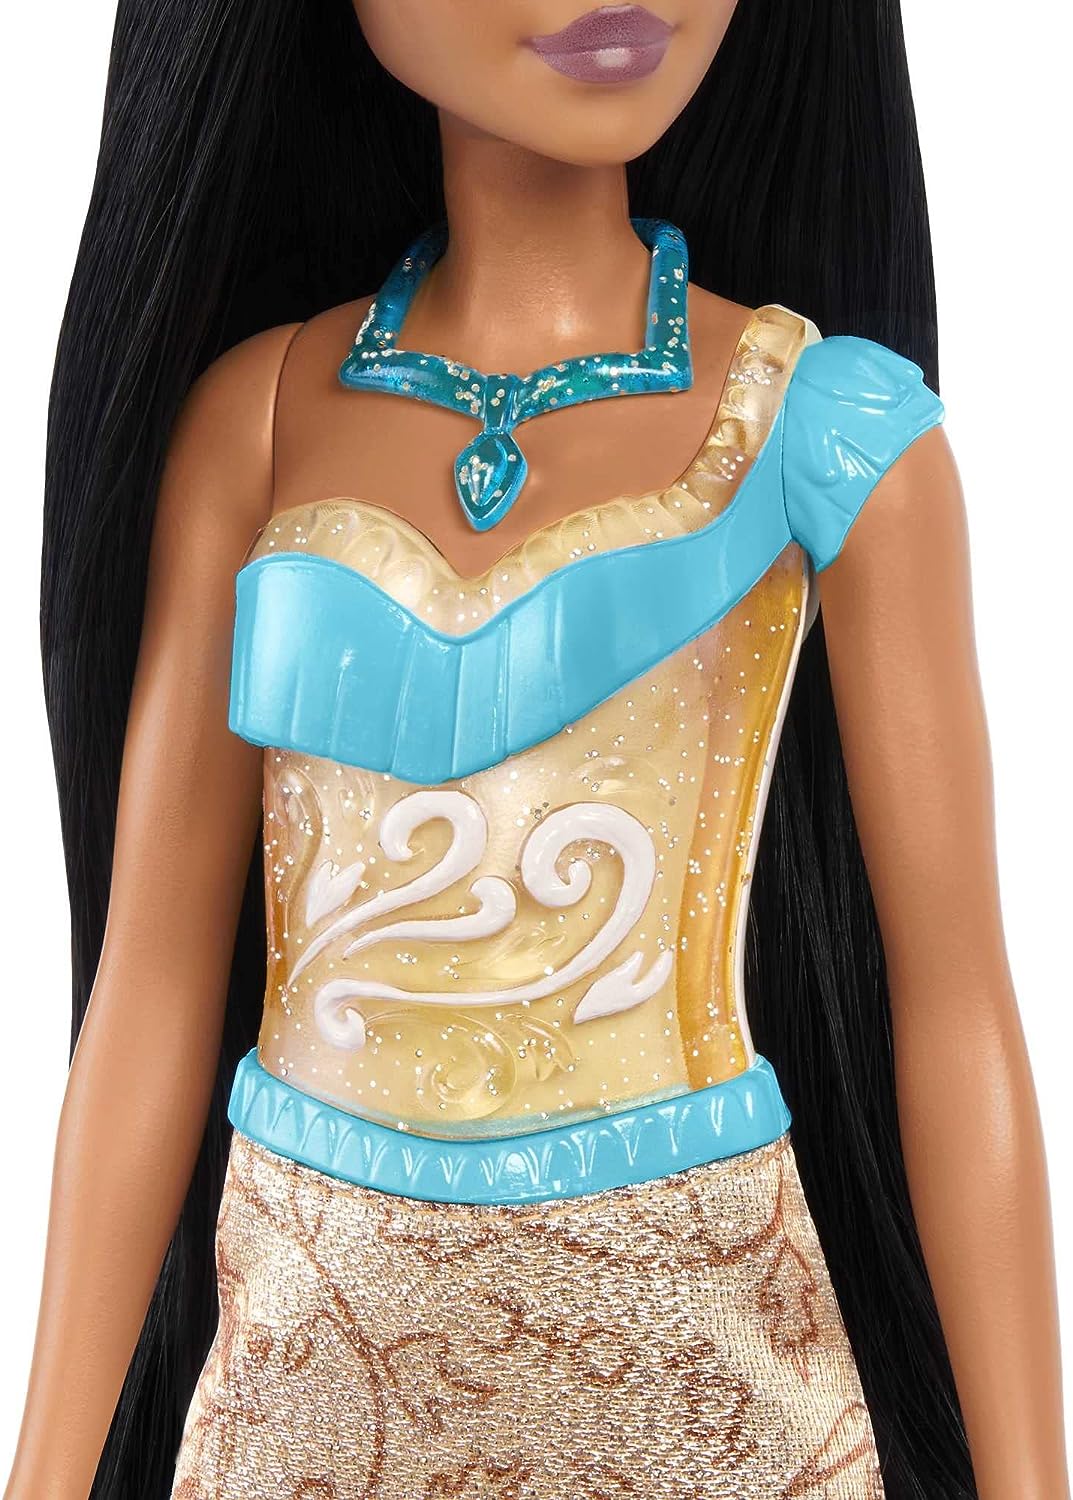 Disney Princess Toys, Pocahontas Posable Fashion Doll with Sparkling Clothing and Accessories